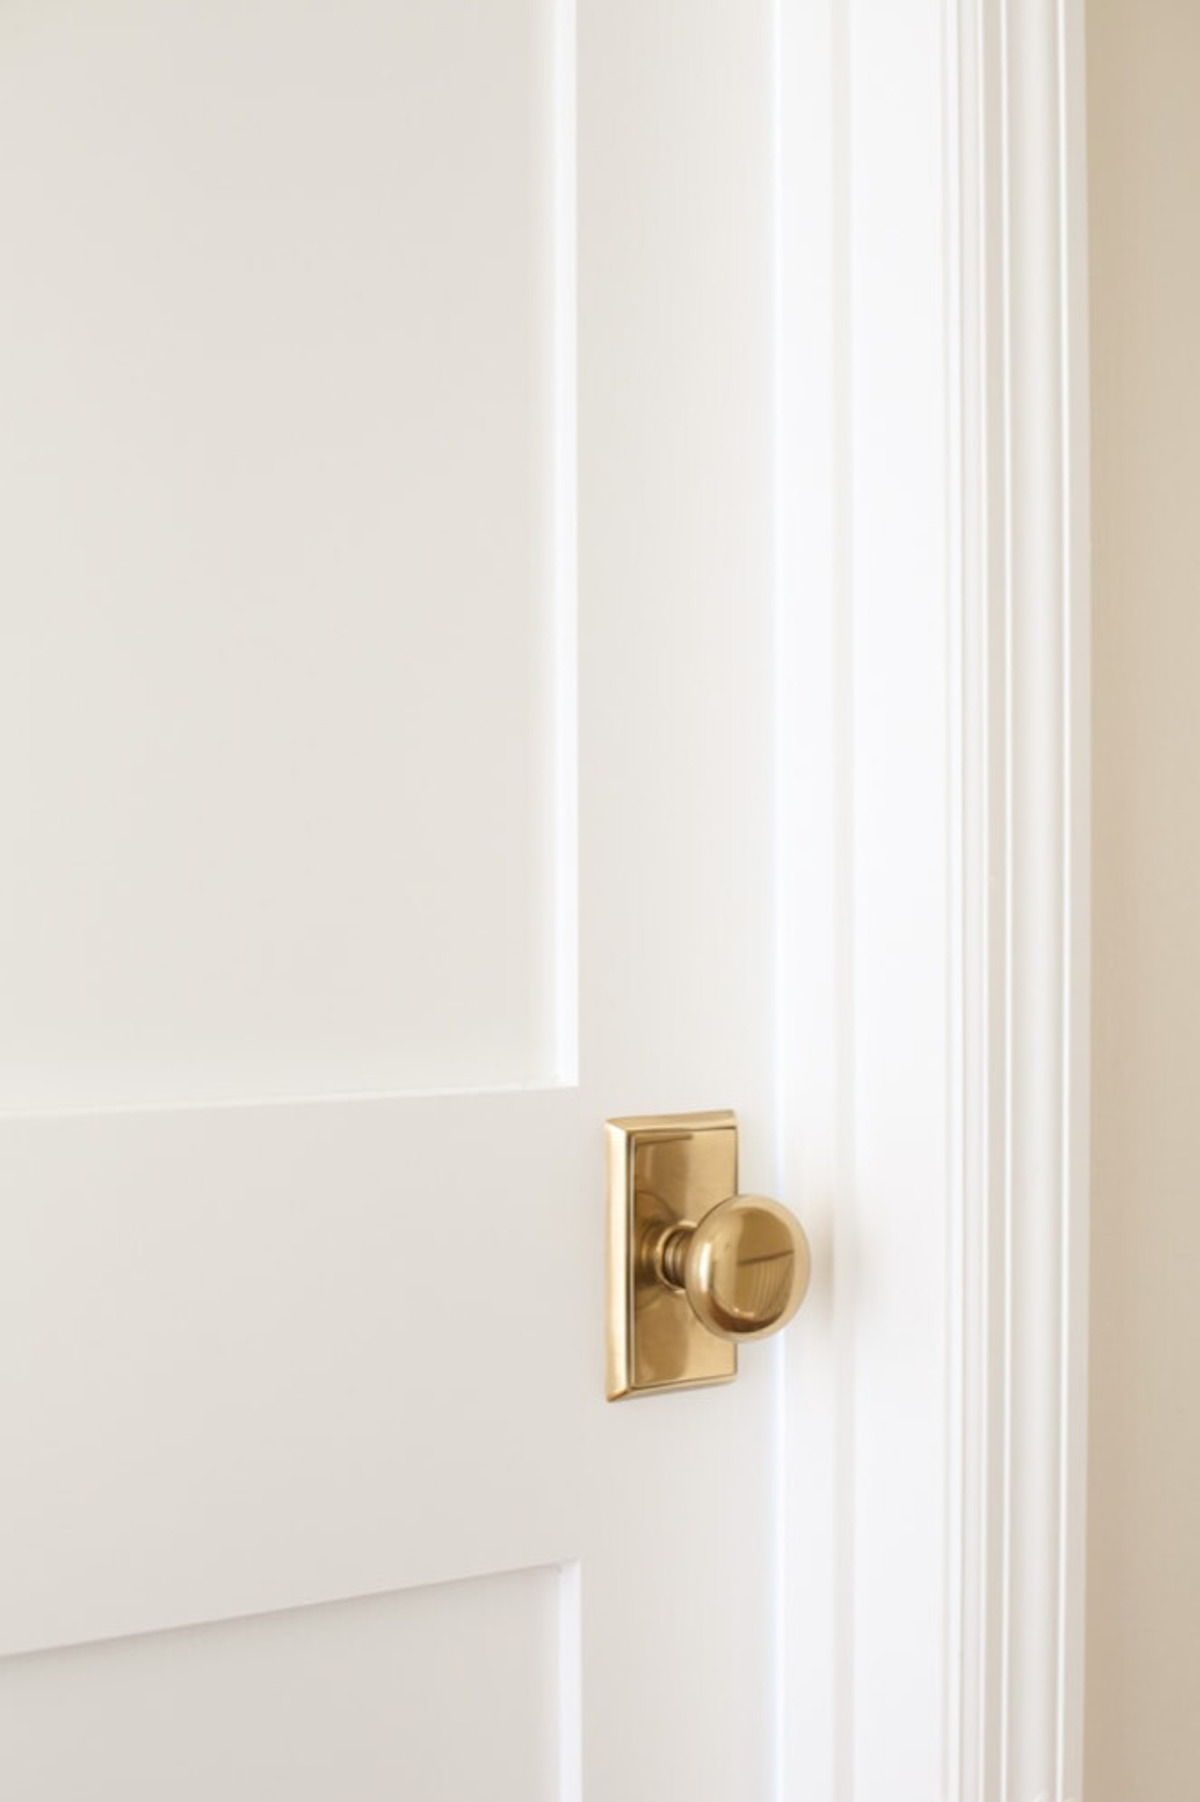 A white door partially ajar with a brass knob and trim, freshly painted for an interior makeover.